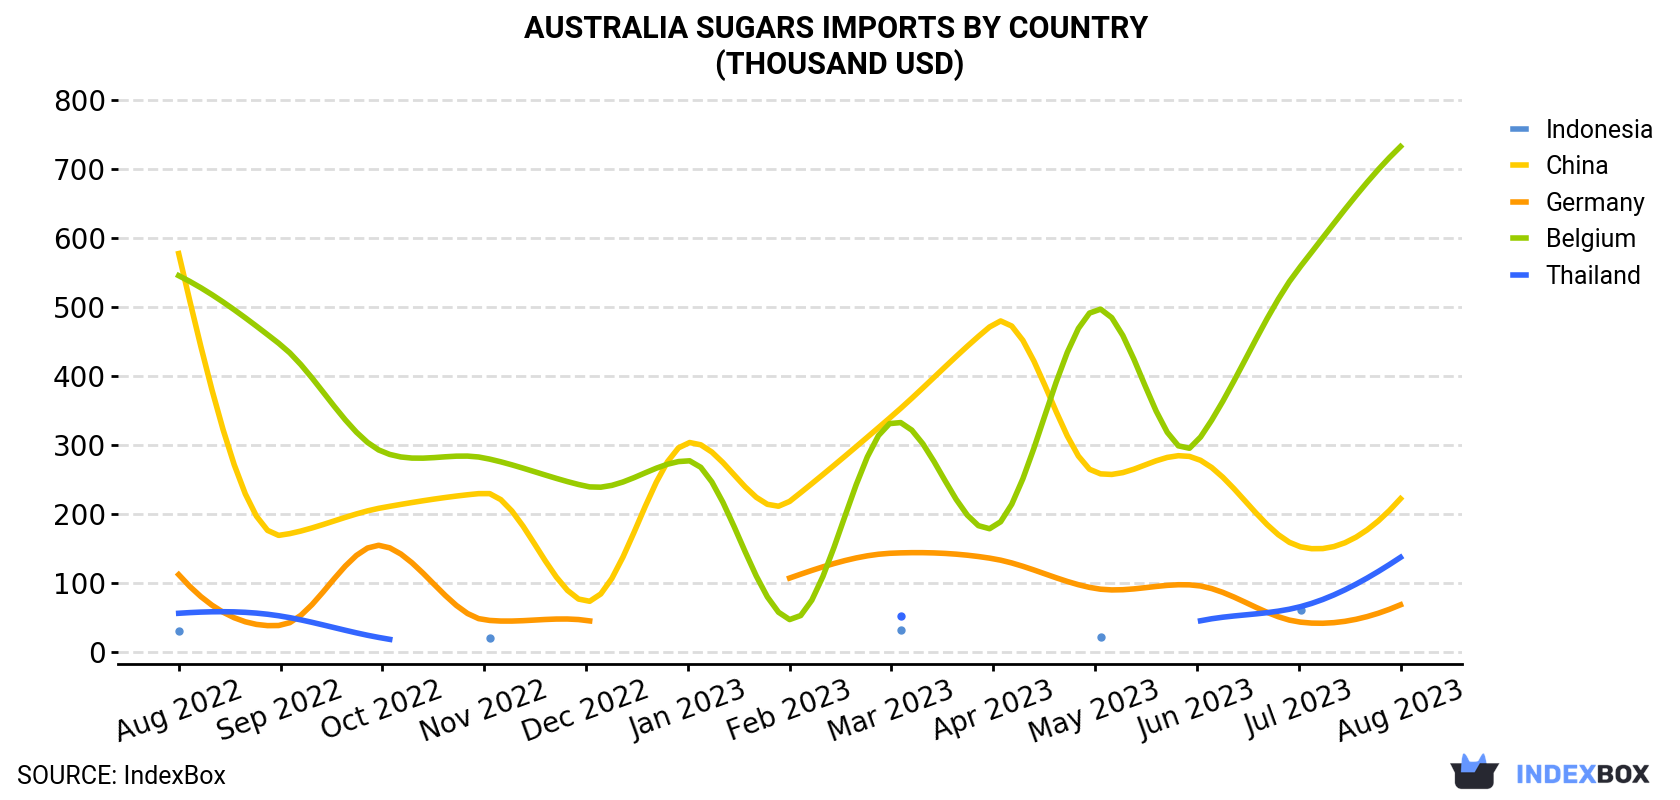 Australia Sugars Imports By Country (Thousand USD)